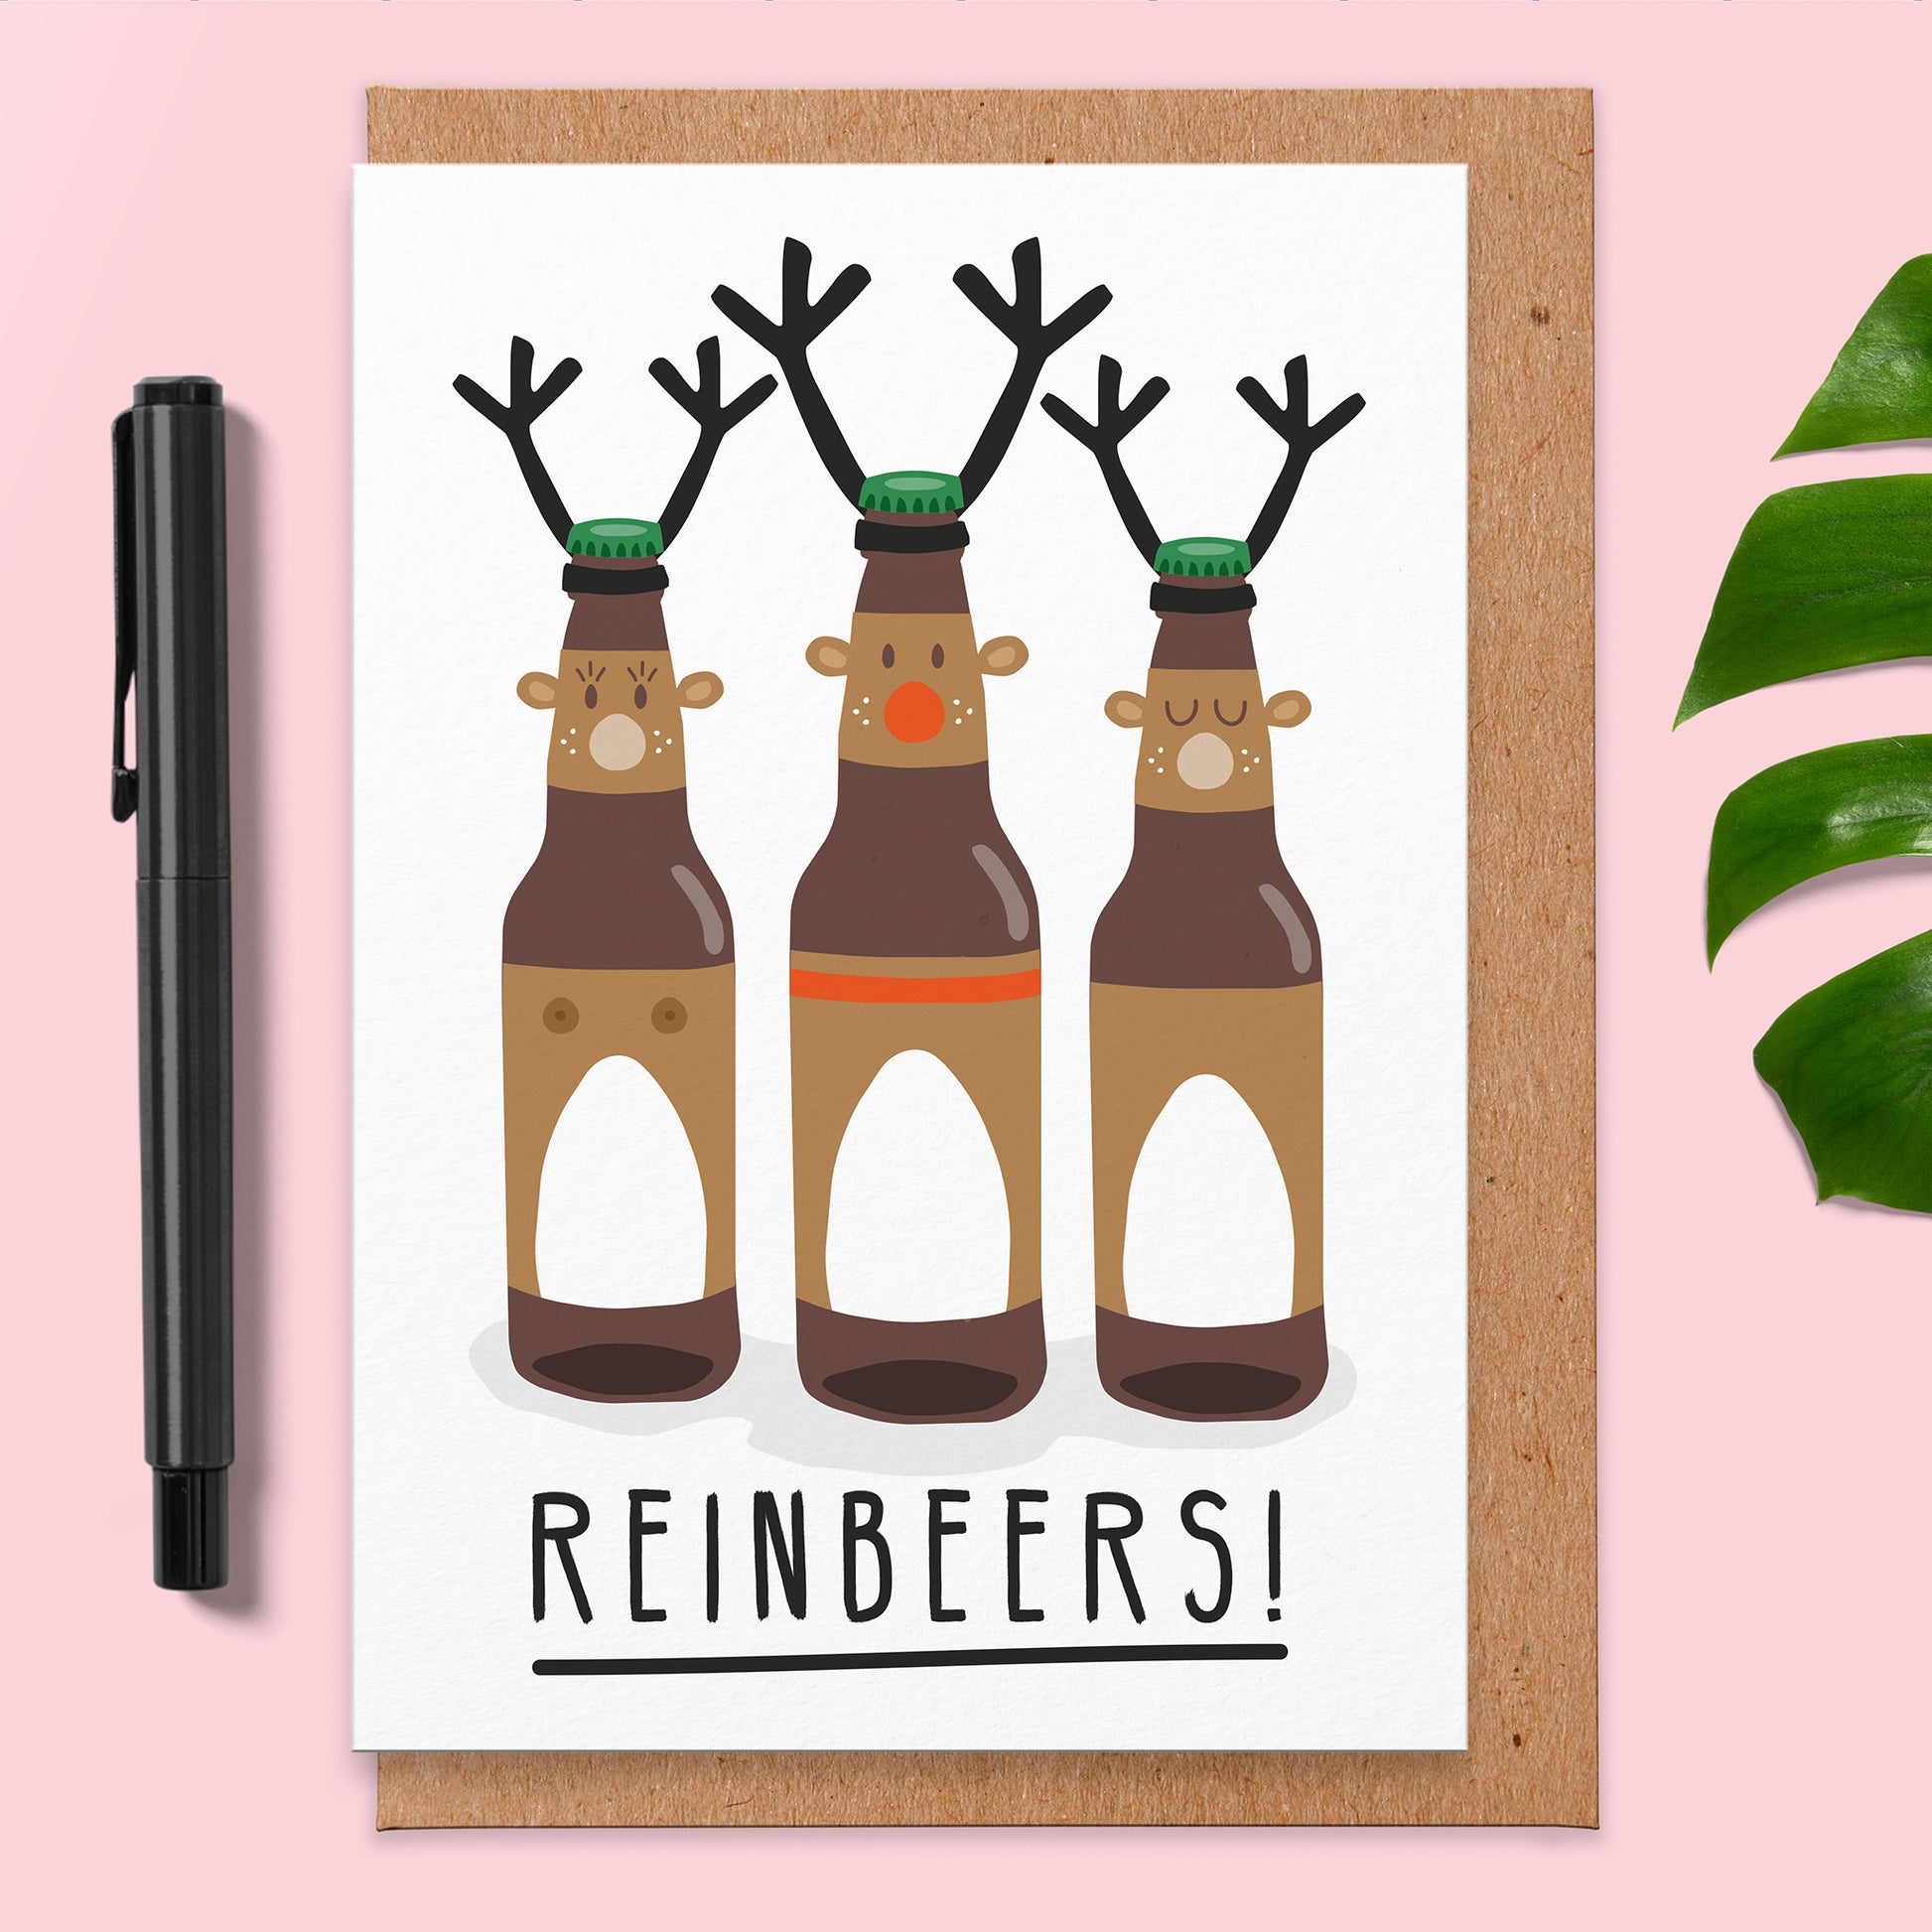 Christmas card with an illustration of 3 bottles of beer that have antlers and ears and the middle one has a red nose. The card reads reinbeers!